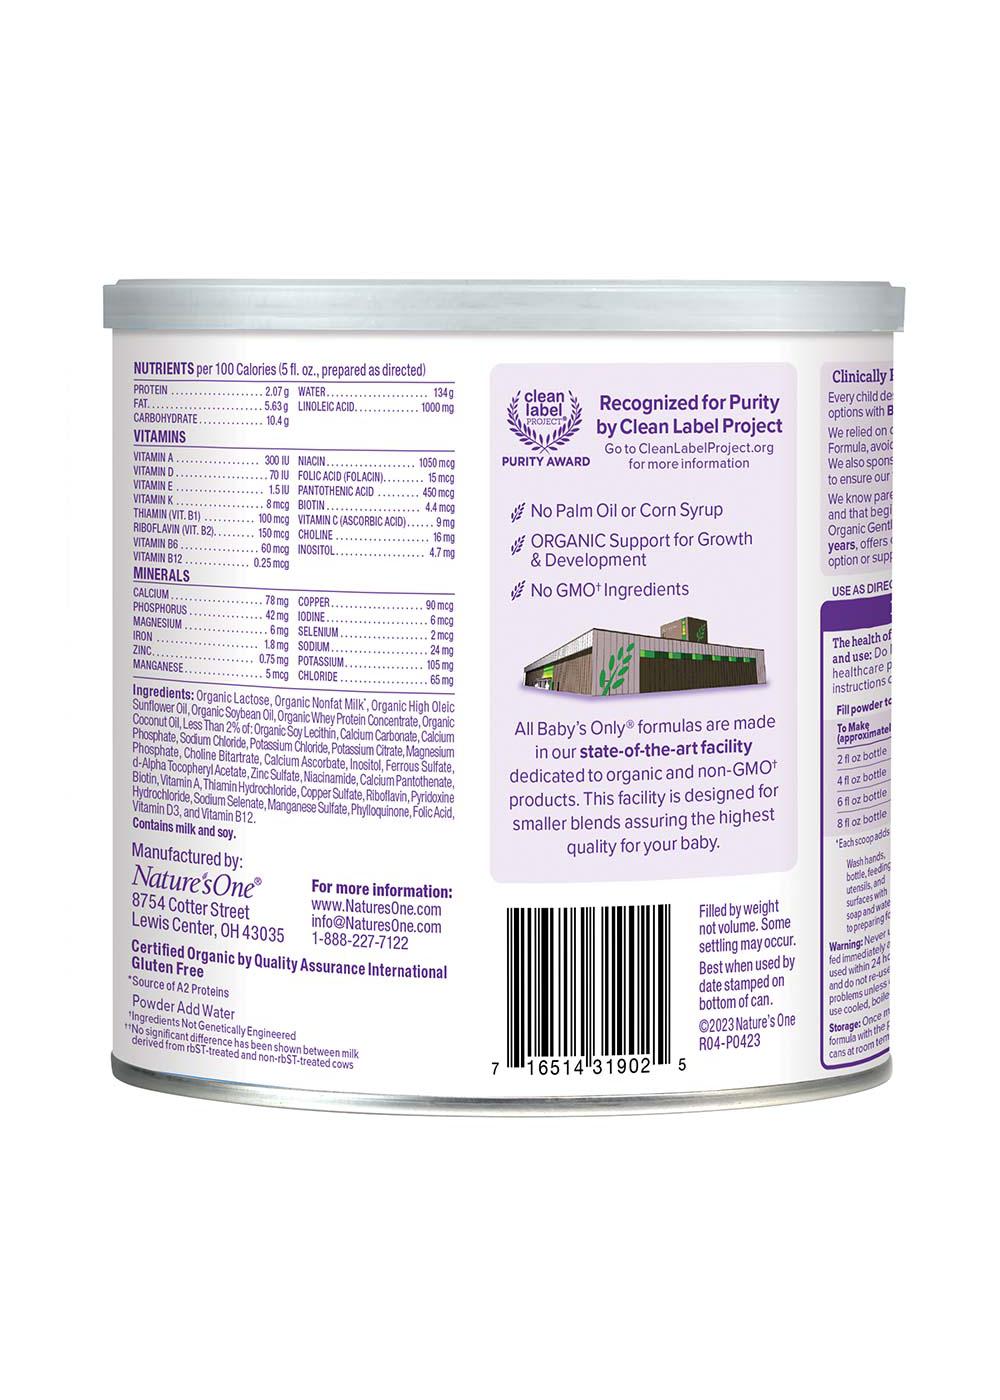 Baby's Only Organic Gentle Milk-Based Powder Infant Formula with Iron; image 3 of 3